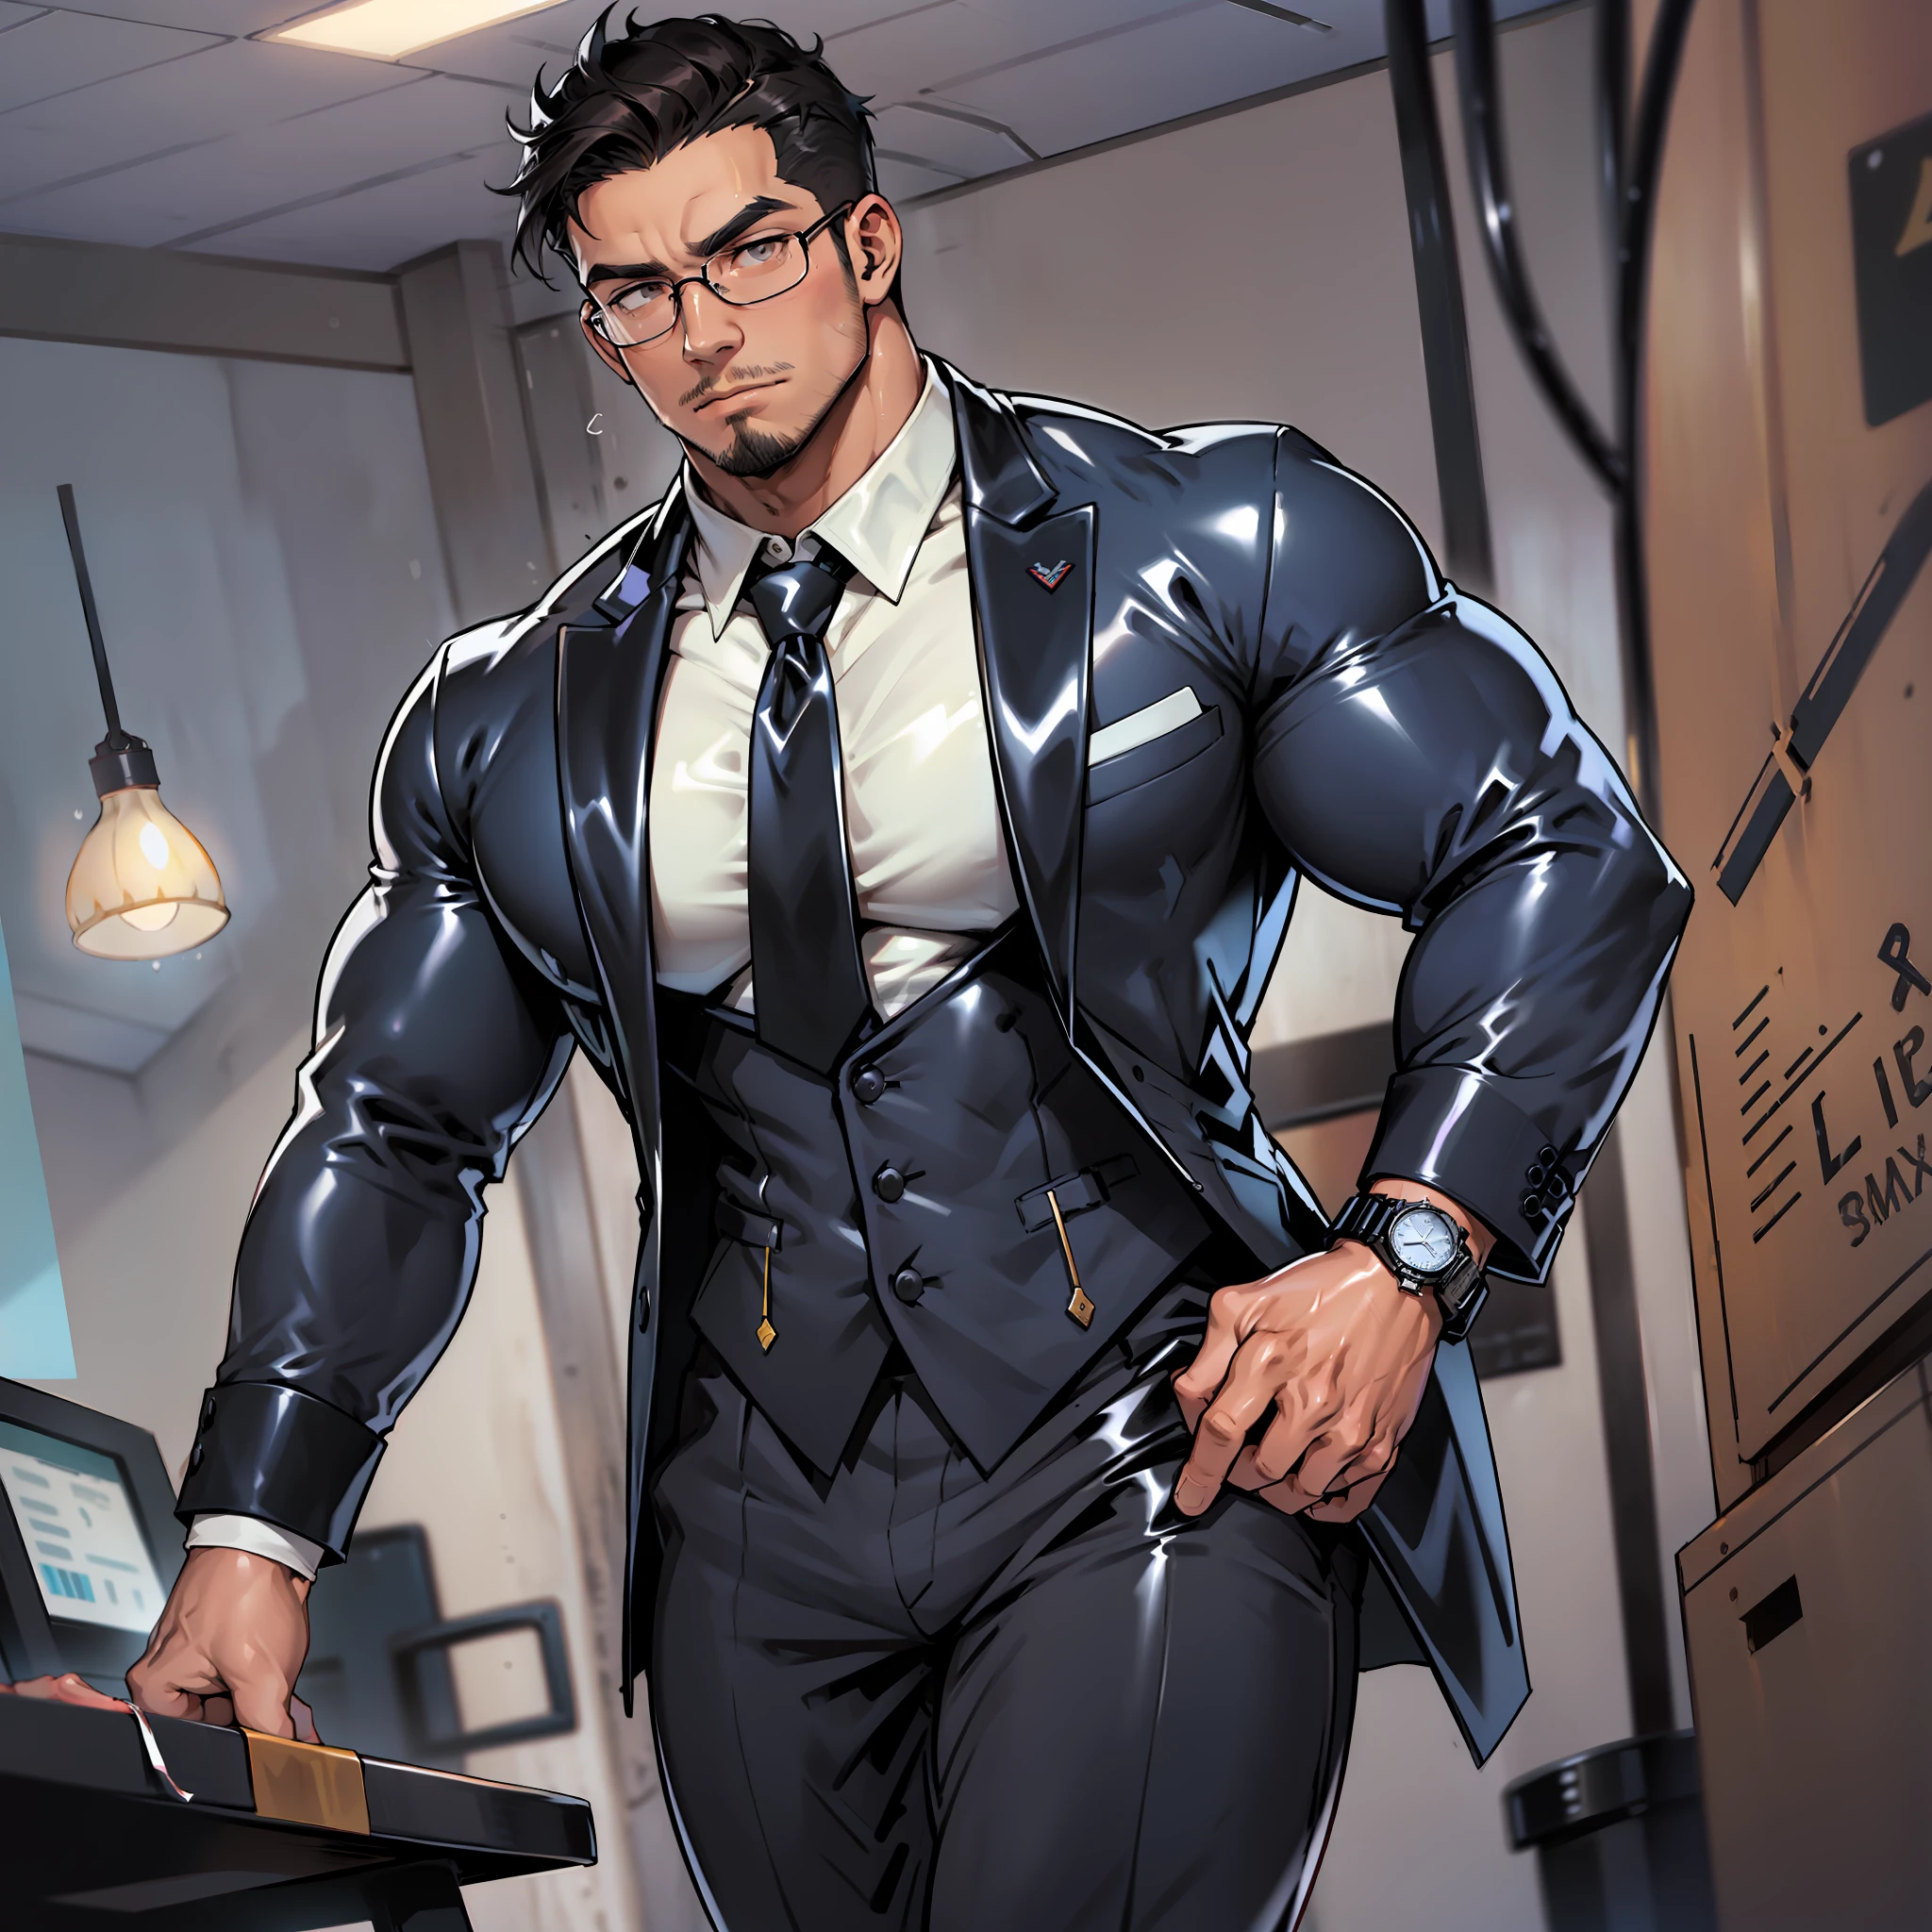 (Excessive latex luster:1.5) , (masterpiece: 1.2), (excellent business suit: 1.2), (perfectly detailed 1.5), perfect muscle body , Hyper Pecs, male only, glass-enclosed office of a major company, smartphone in one hand, employee ID hanging from the neck, employee ID on the chest, office worker, businessman, black-framed glasses, business suit, tight business Jacket, tight and thin business slacks, white long-sleeved shirt, tight suit vest, tie, suspenders, business shoes, luxury watch, men's socks, big muscle, huge body, hyper muscle, masculinity, 35 years old, mature man with dark hair and dark eyes, handsome, well-dressed, beautiful muscles, complex and elegant, muscled man, beard, sideburns, facial hair, cropped short hair, male focus, big ass, big Pectoralis major muscle, shiny oily skin, tanned skin,